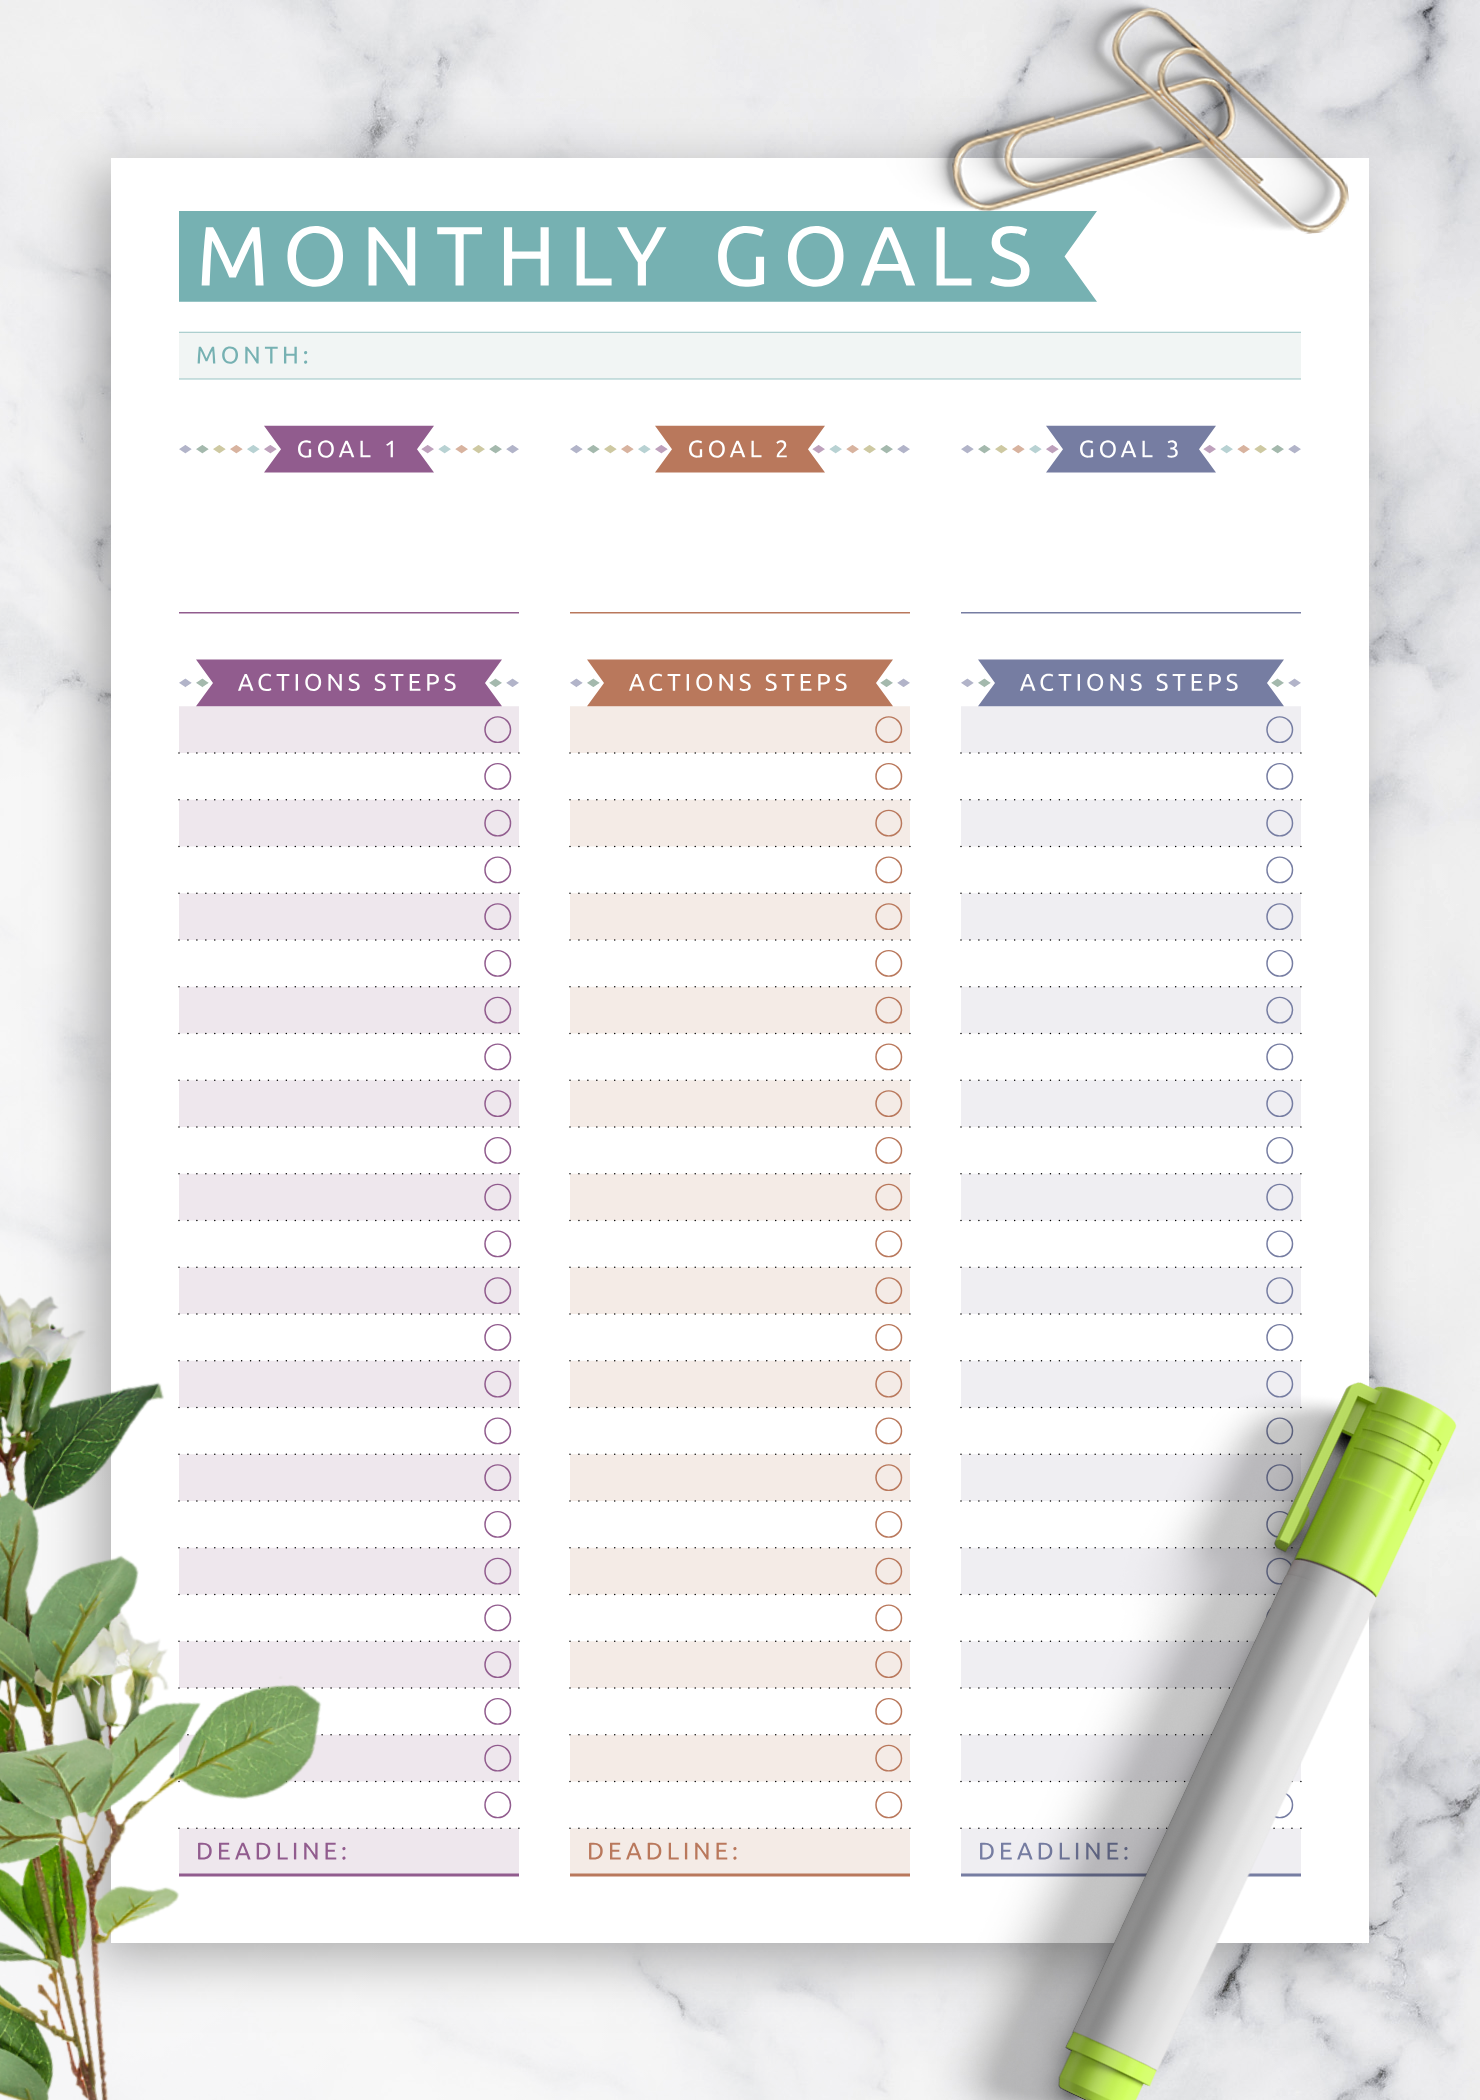 free-monthly-goals-template-templates-printable-download